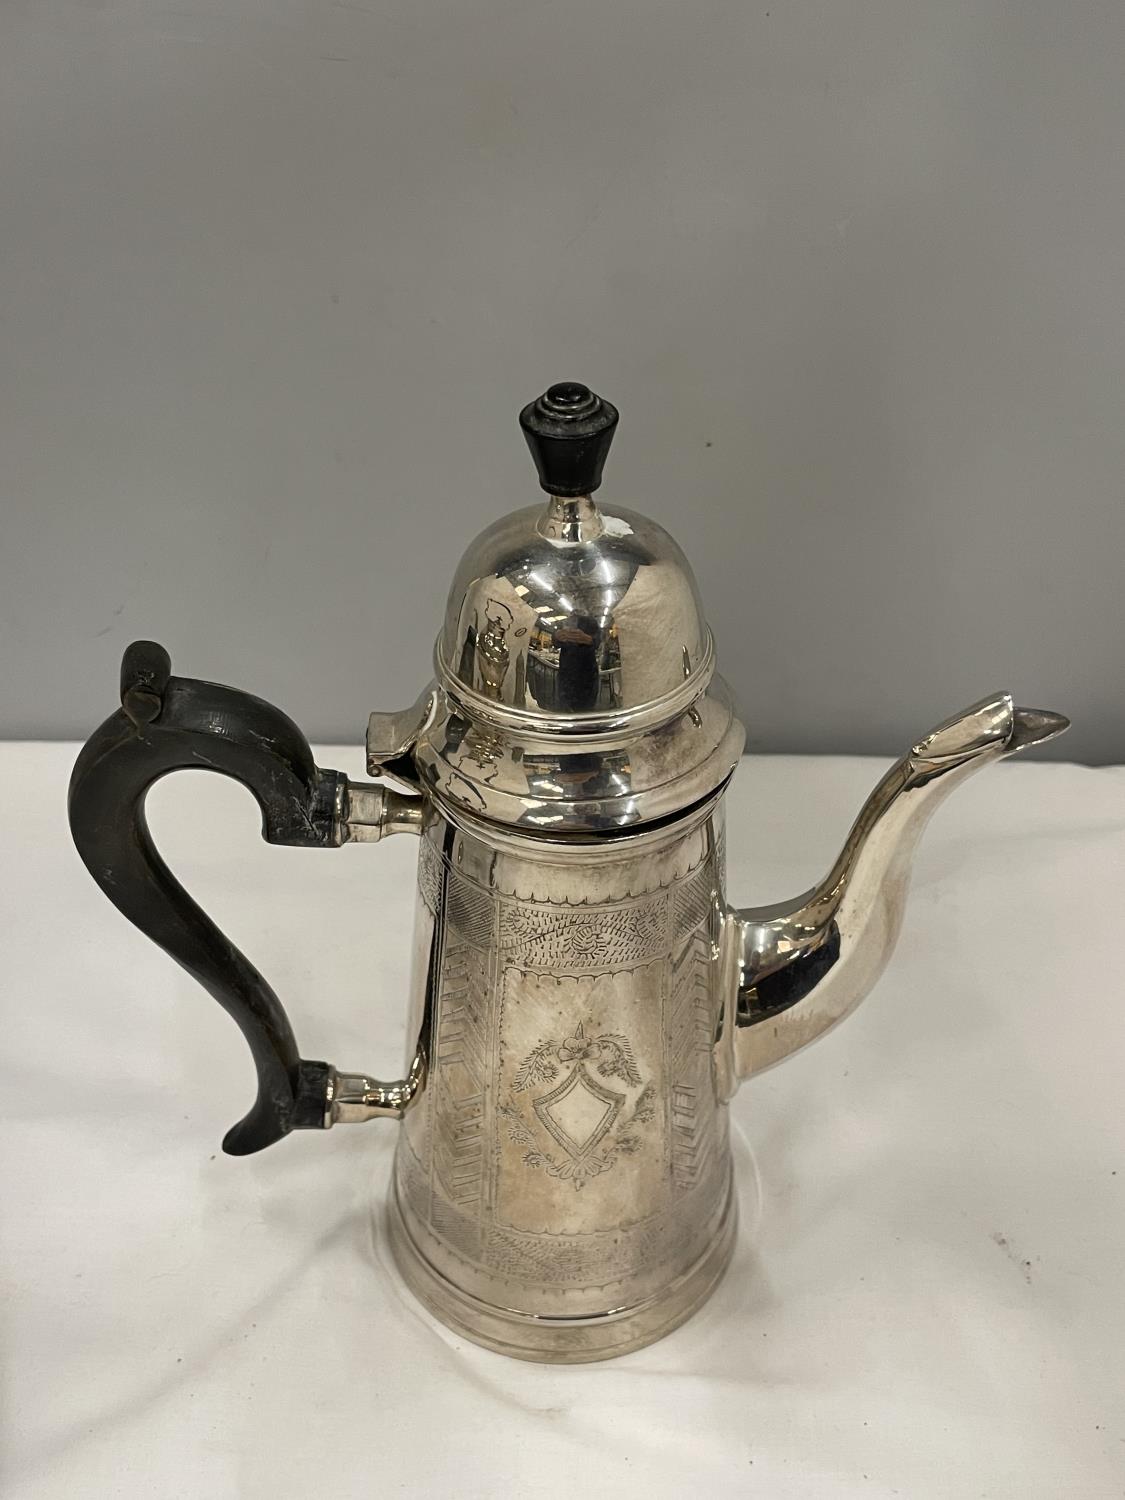 THREE SILVER PLATED ITEMS TO INCLUDE A SPIRIT KETTLE, COFFEE POT AND A SUGAR SIFTER - Image 7 of 10